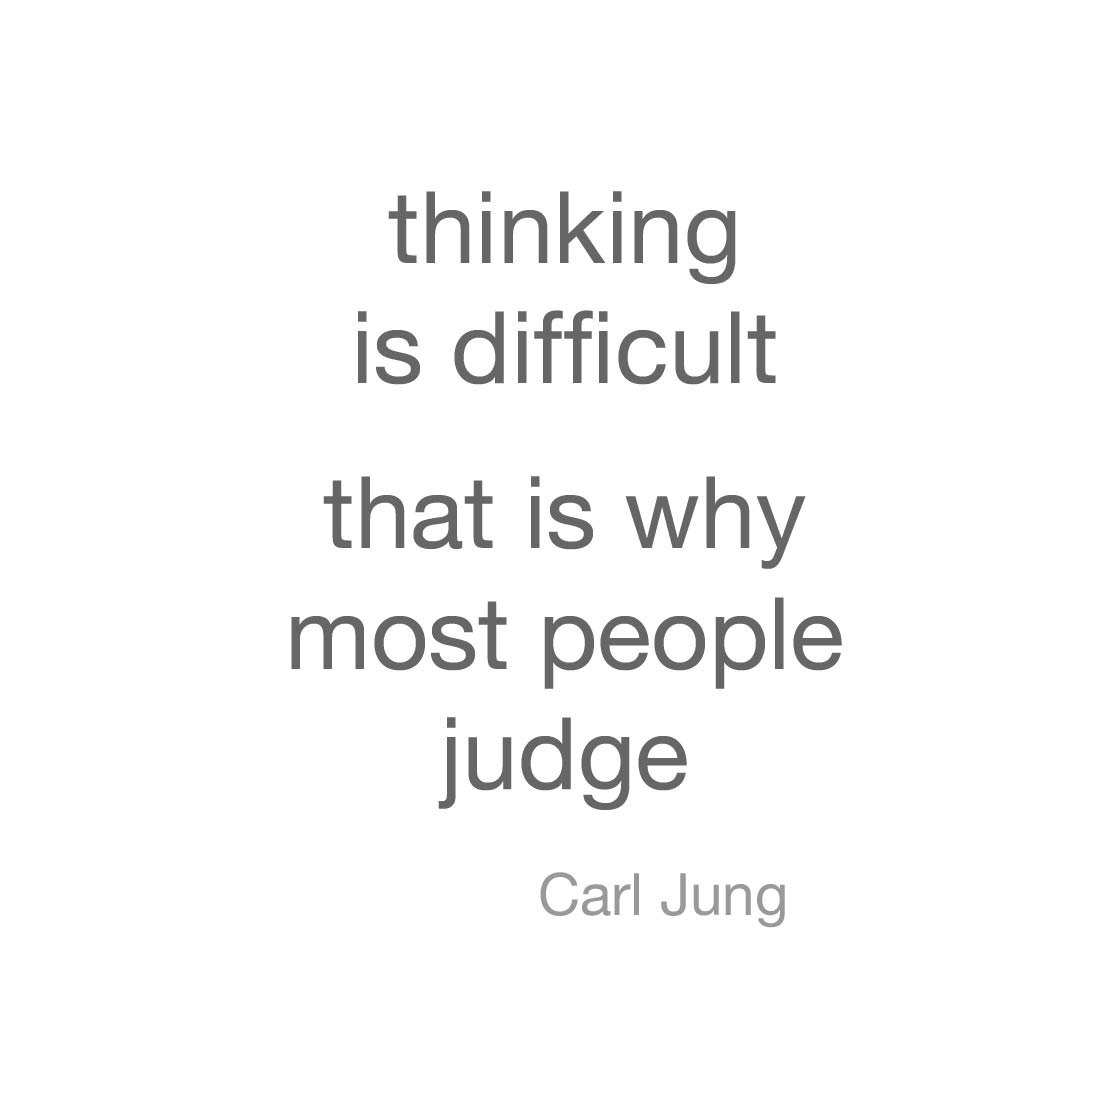 Thinking is difficult. That is why most people judge. – Carl Jung